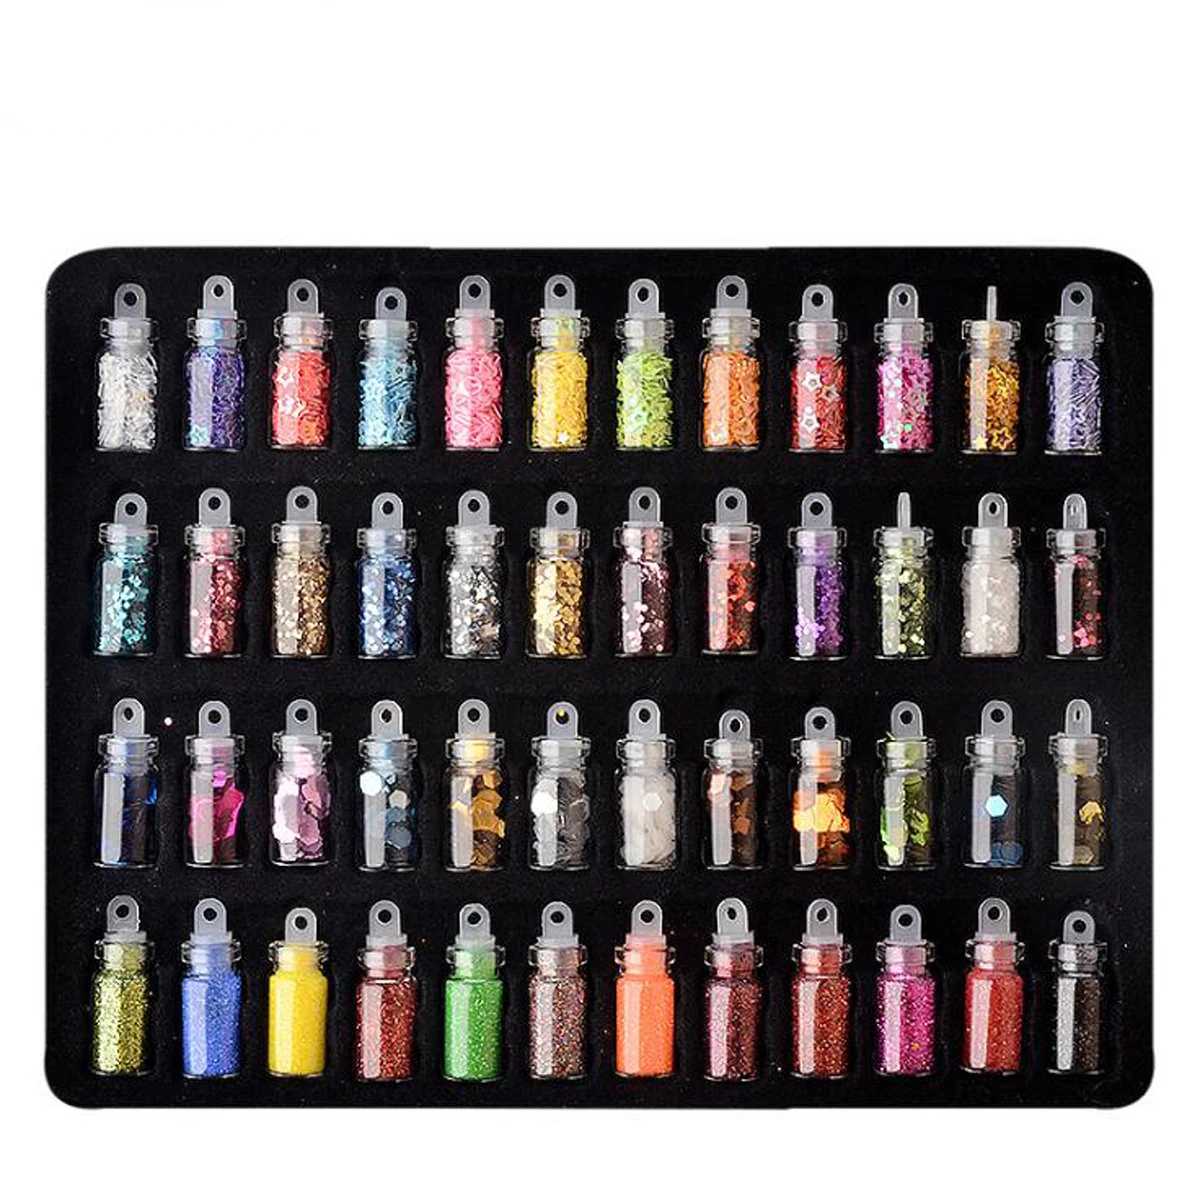 48bottles/set Colorful Nail Glitter Sequins Symphony Sparks Nail Patch Phototherapy DIY Dotted Decorations